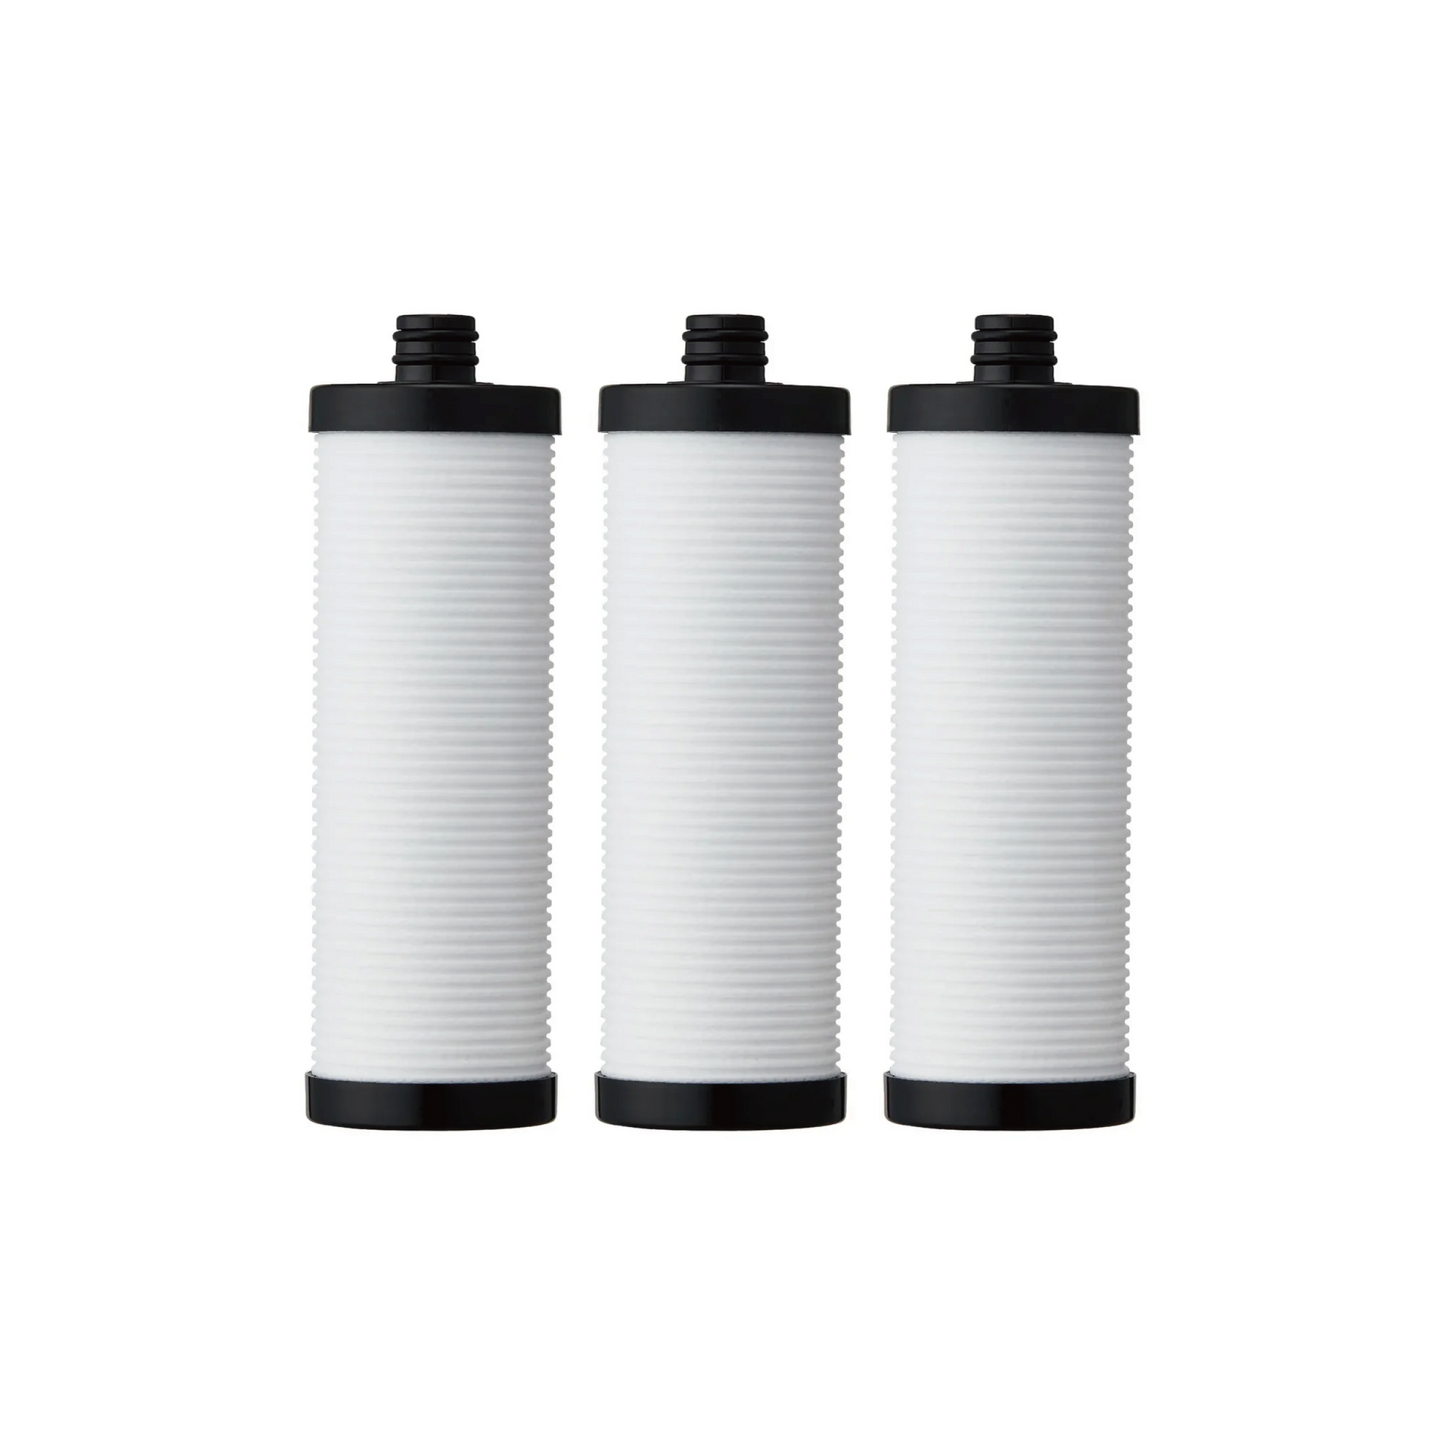 [ACF-350-3] aka PMRF-03 Refill ACF Filter for ES-350